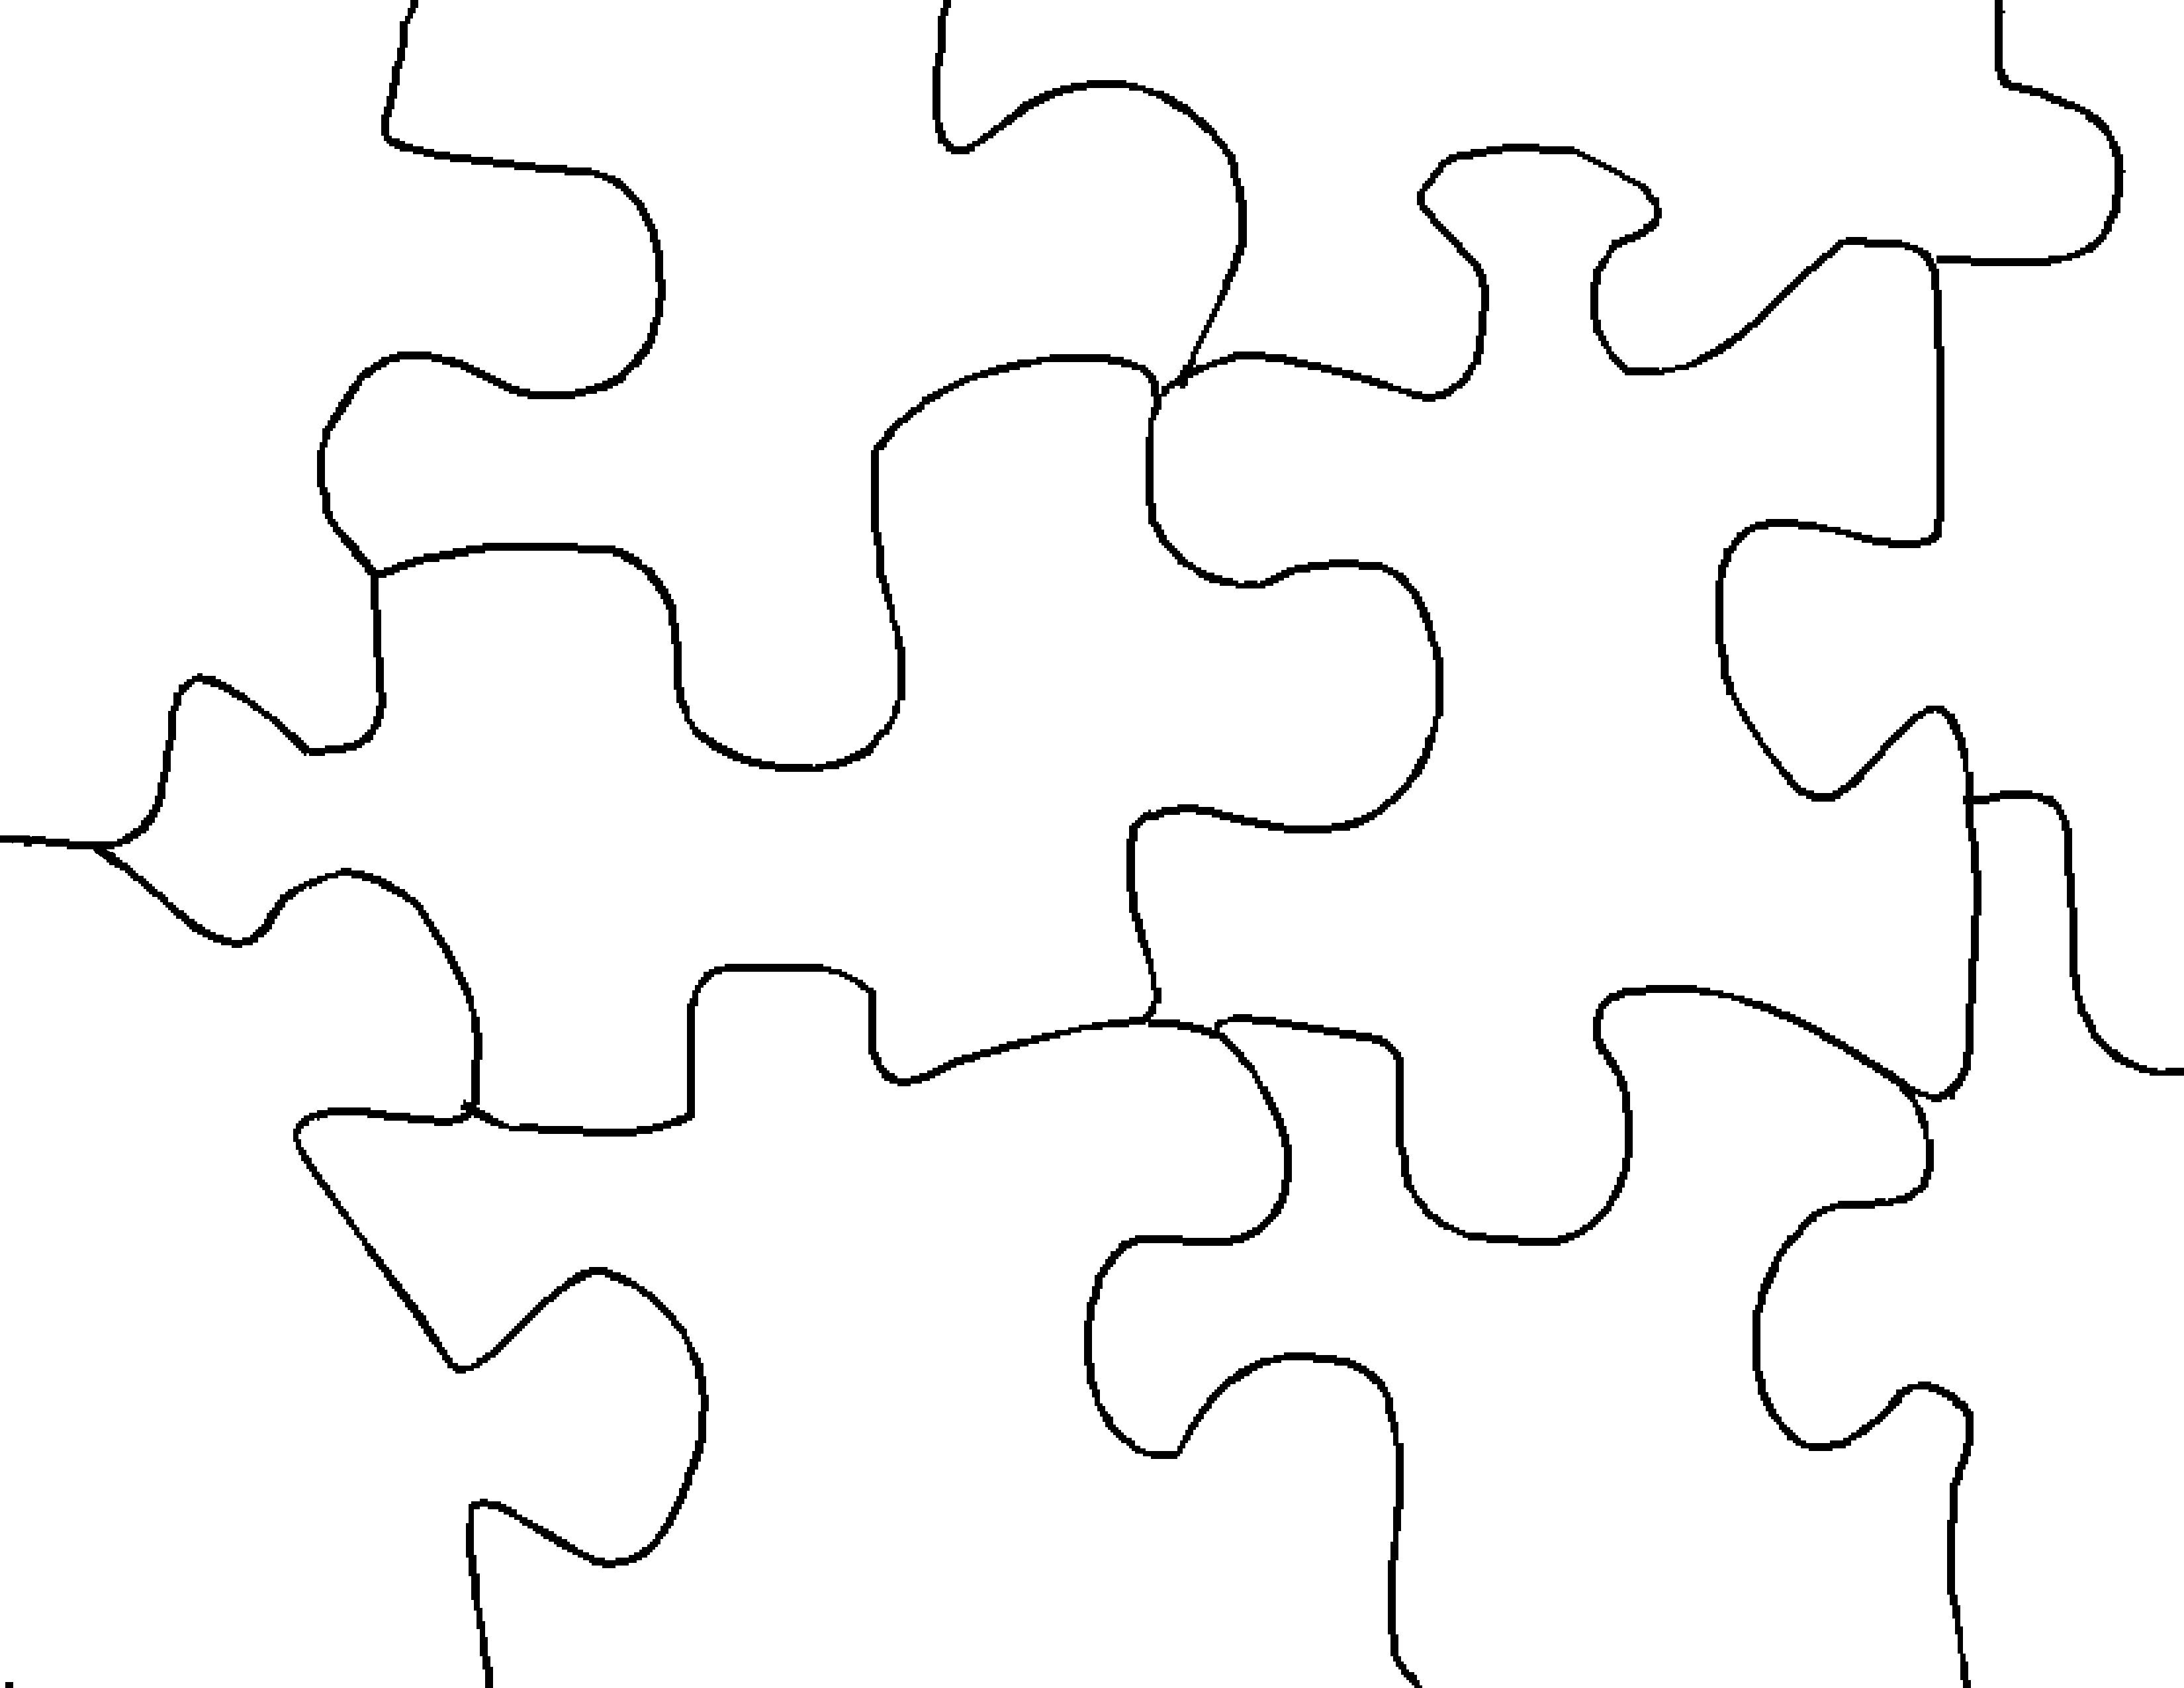 Make Jigsaw Puzzle - Printable Jigsaw Puzzle Paper